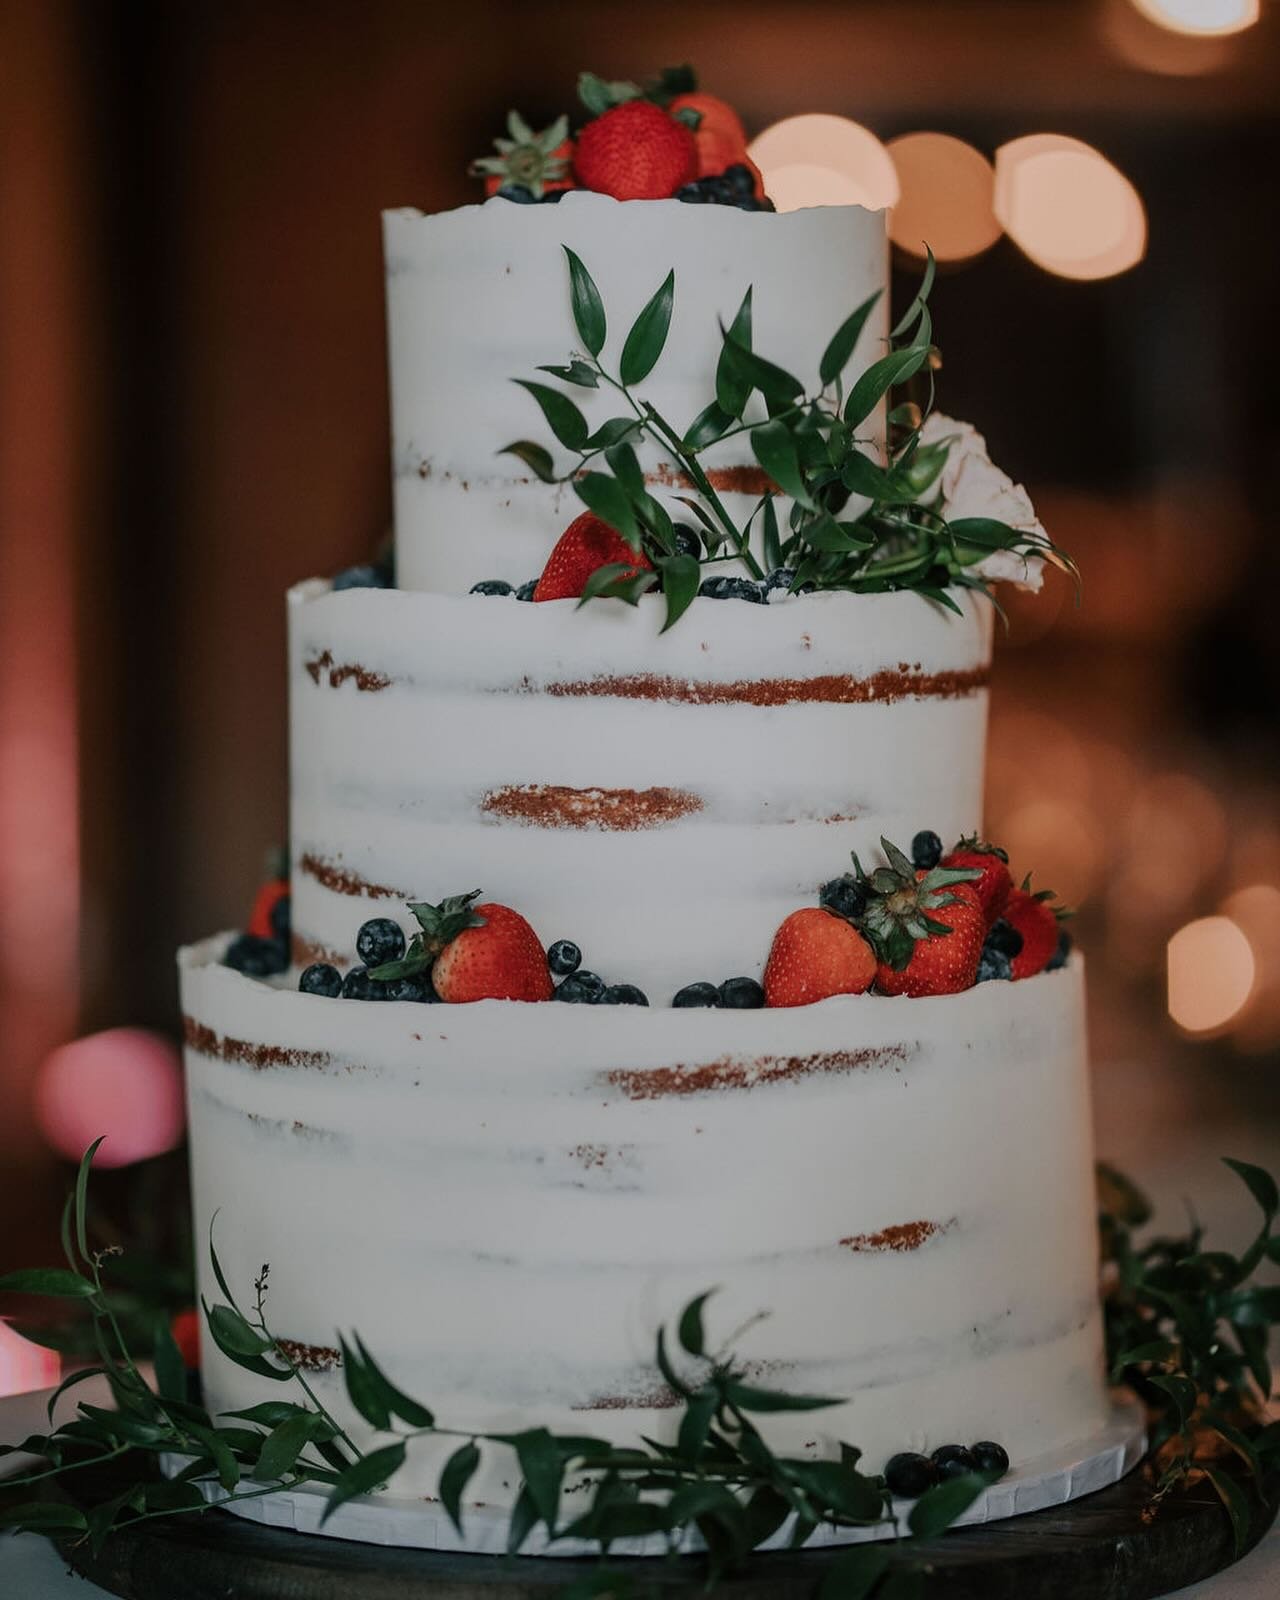 When the cake has fruit on it, it&rsquo;s practically a health food, so really it would be a shame not to eat it! 

@mattwarren_photography 
@amybeckcakedesign 

#wedding #cake #weddingcake #weddingcakes #dessert #sweets #weddinginspiration #bakery #